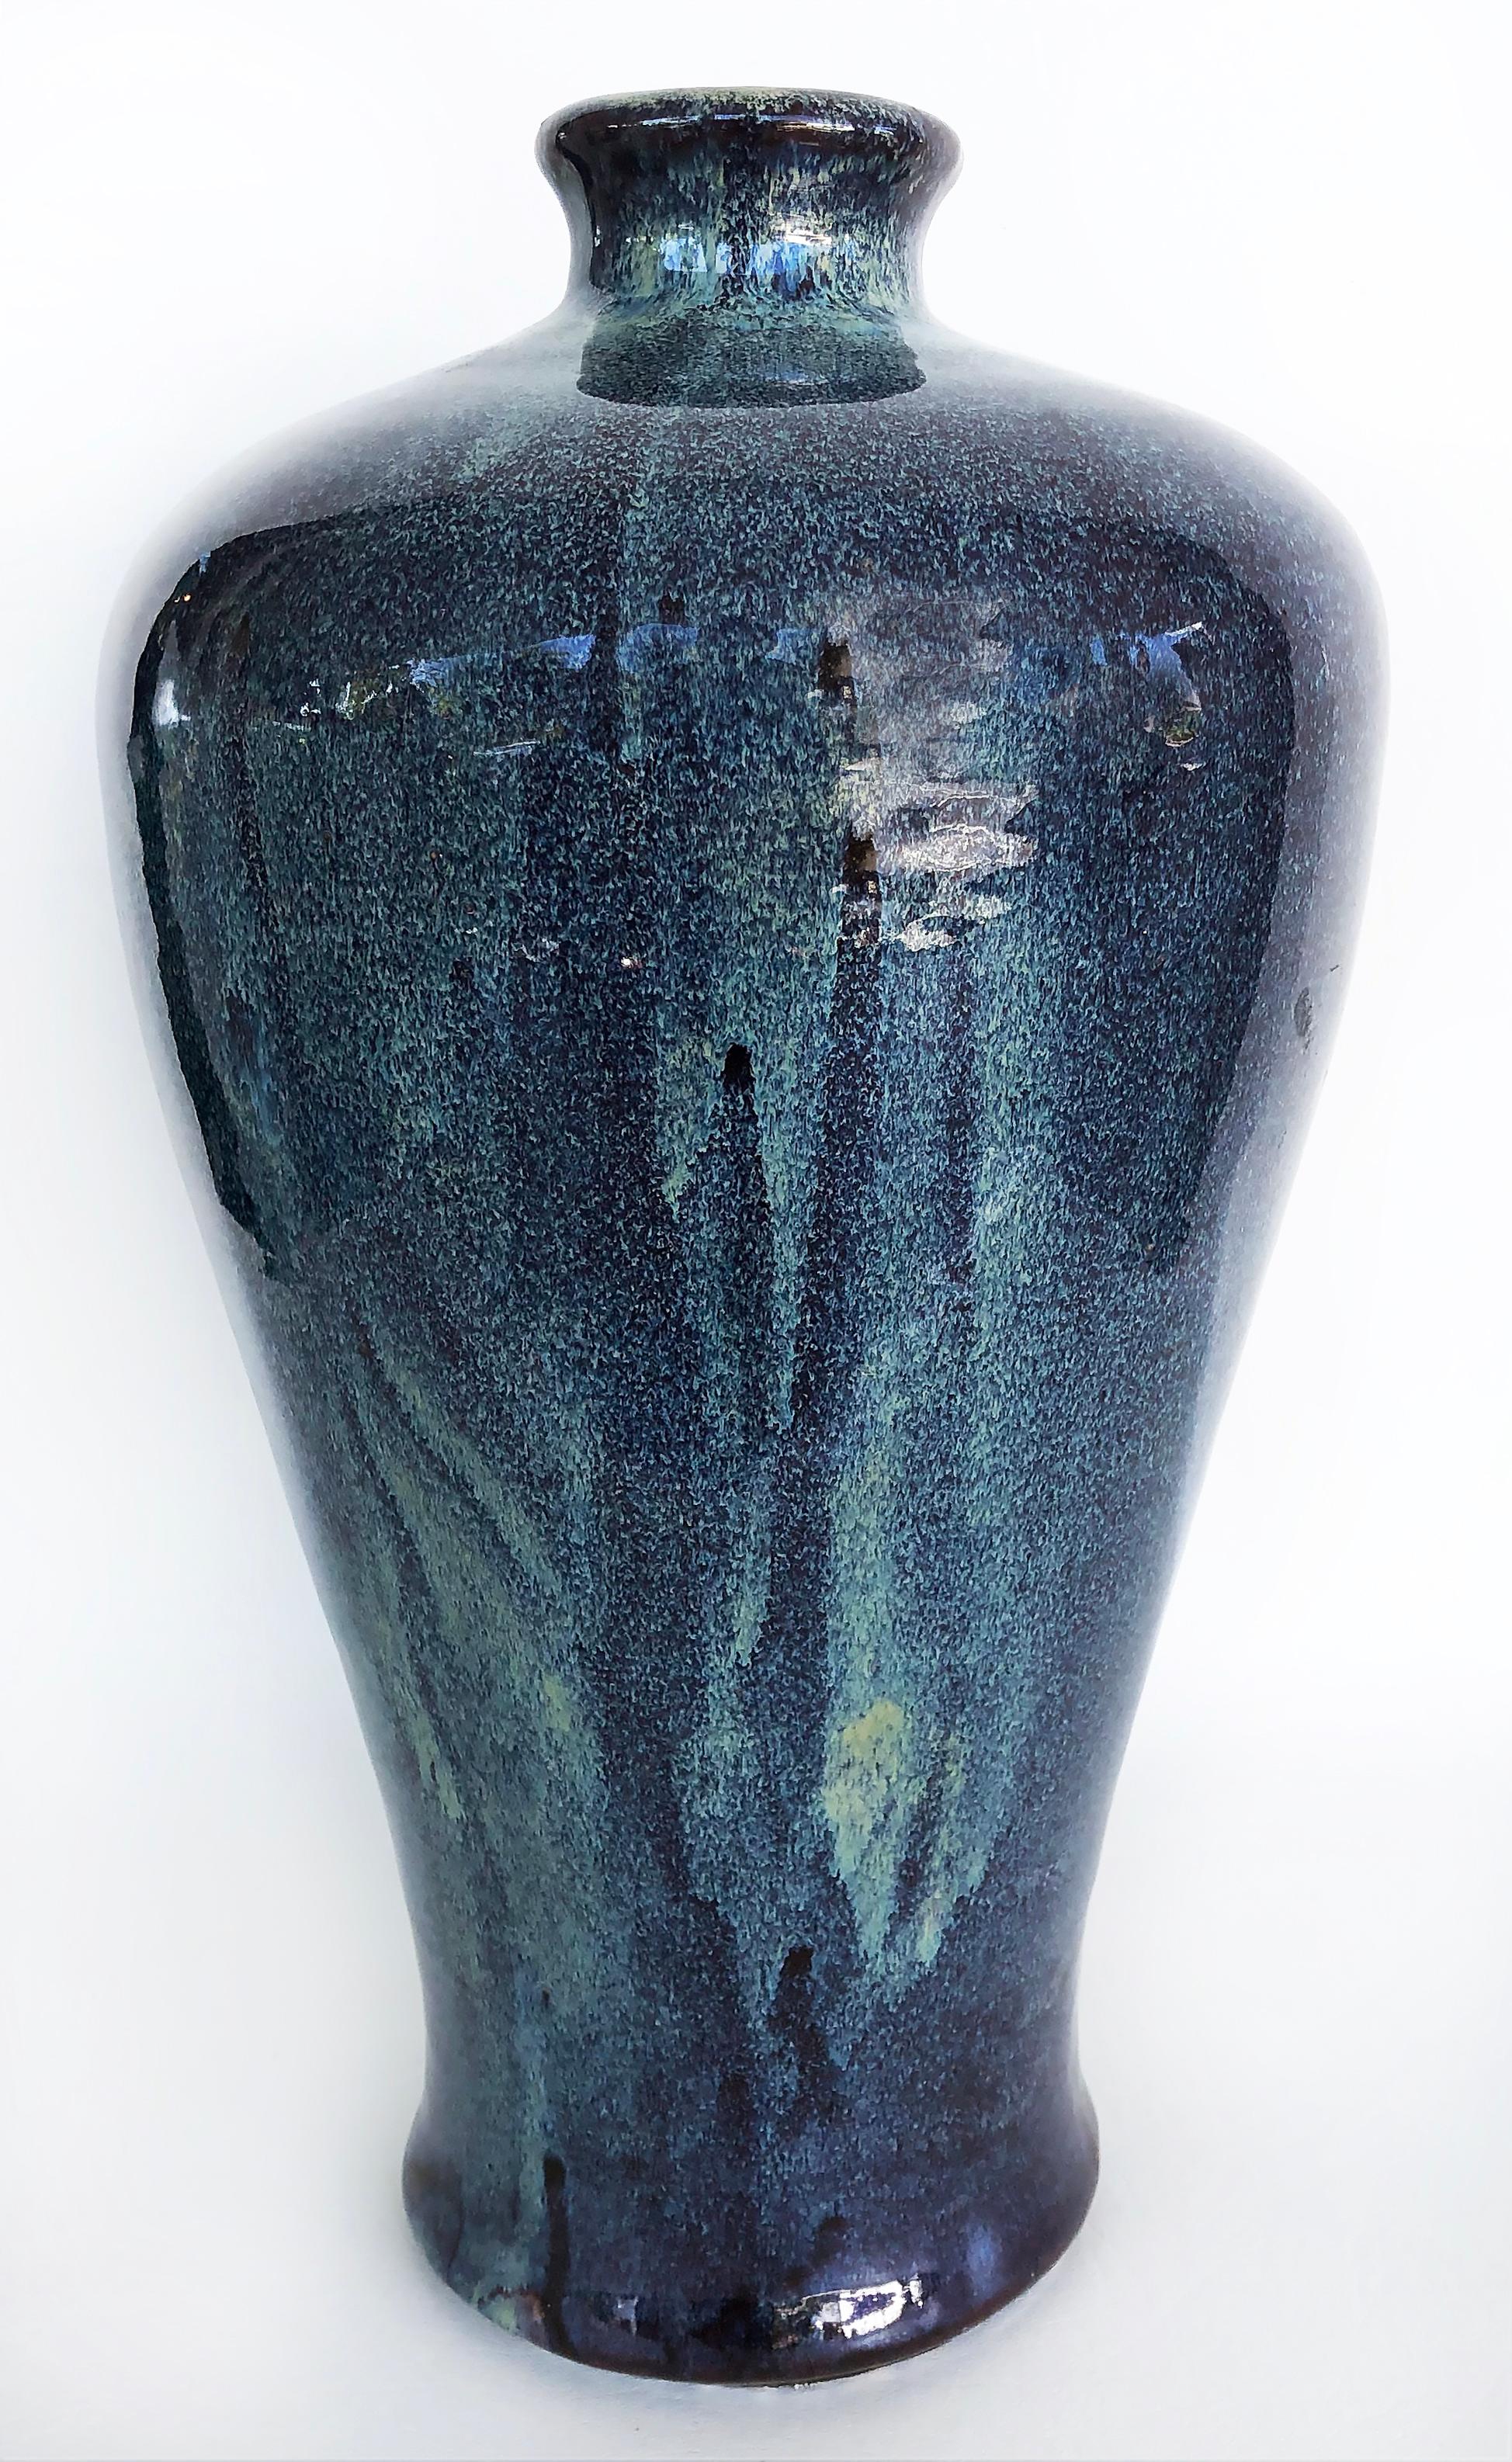 Chinese blue drip glazed ceramic urn vases, a pair.

Offered for sale is a pair of substantial Chinese blue ceramic urn-form vases with drip-glaze finishes. The vases are created with grey clay and have hand-glazed drip finishes that vary and